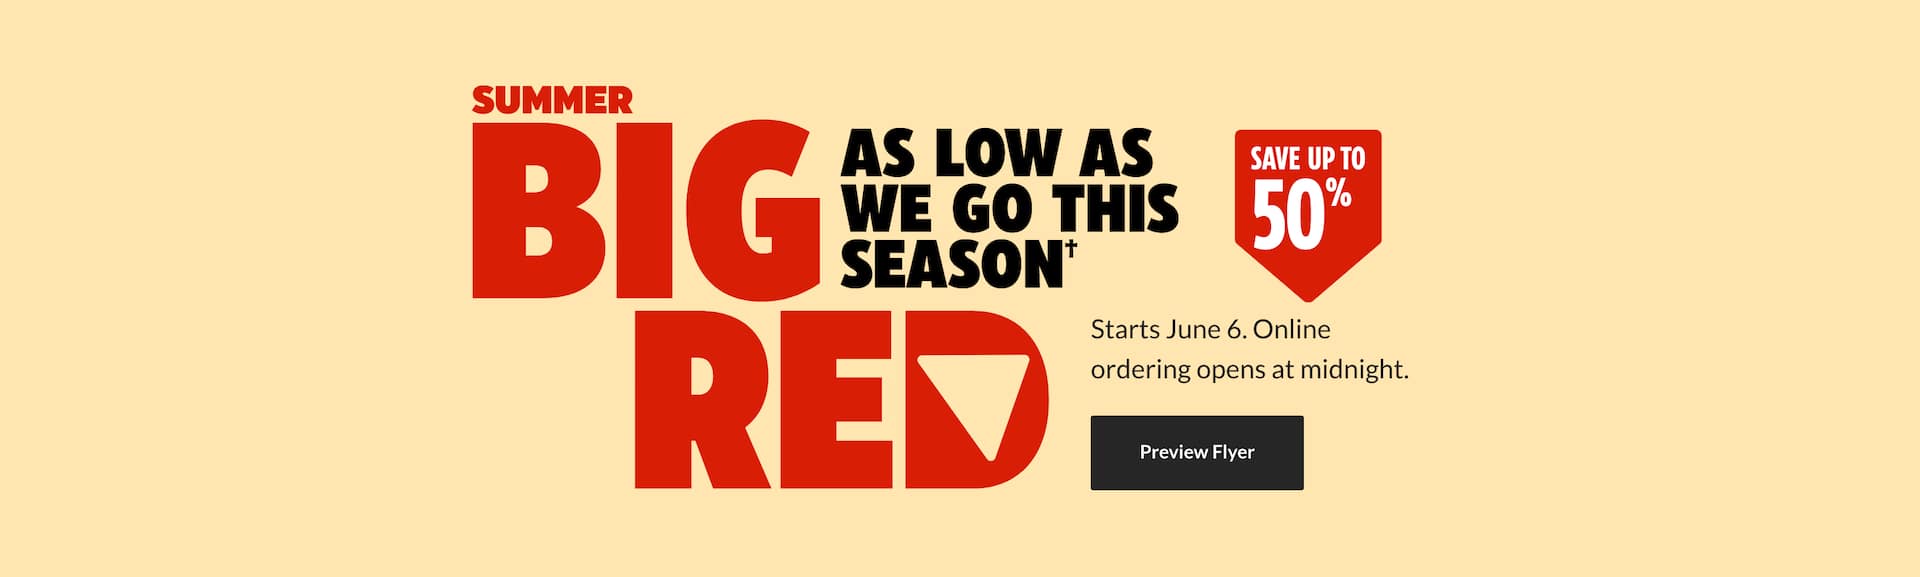 Preview the Summer Big Red flyer now.